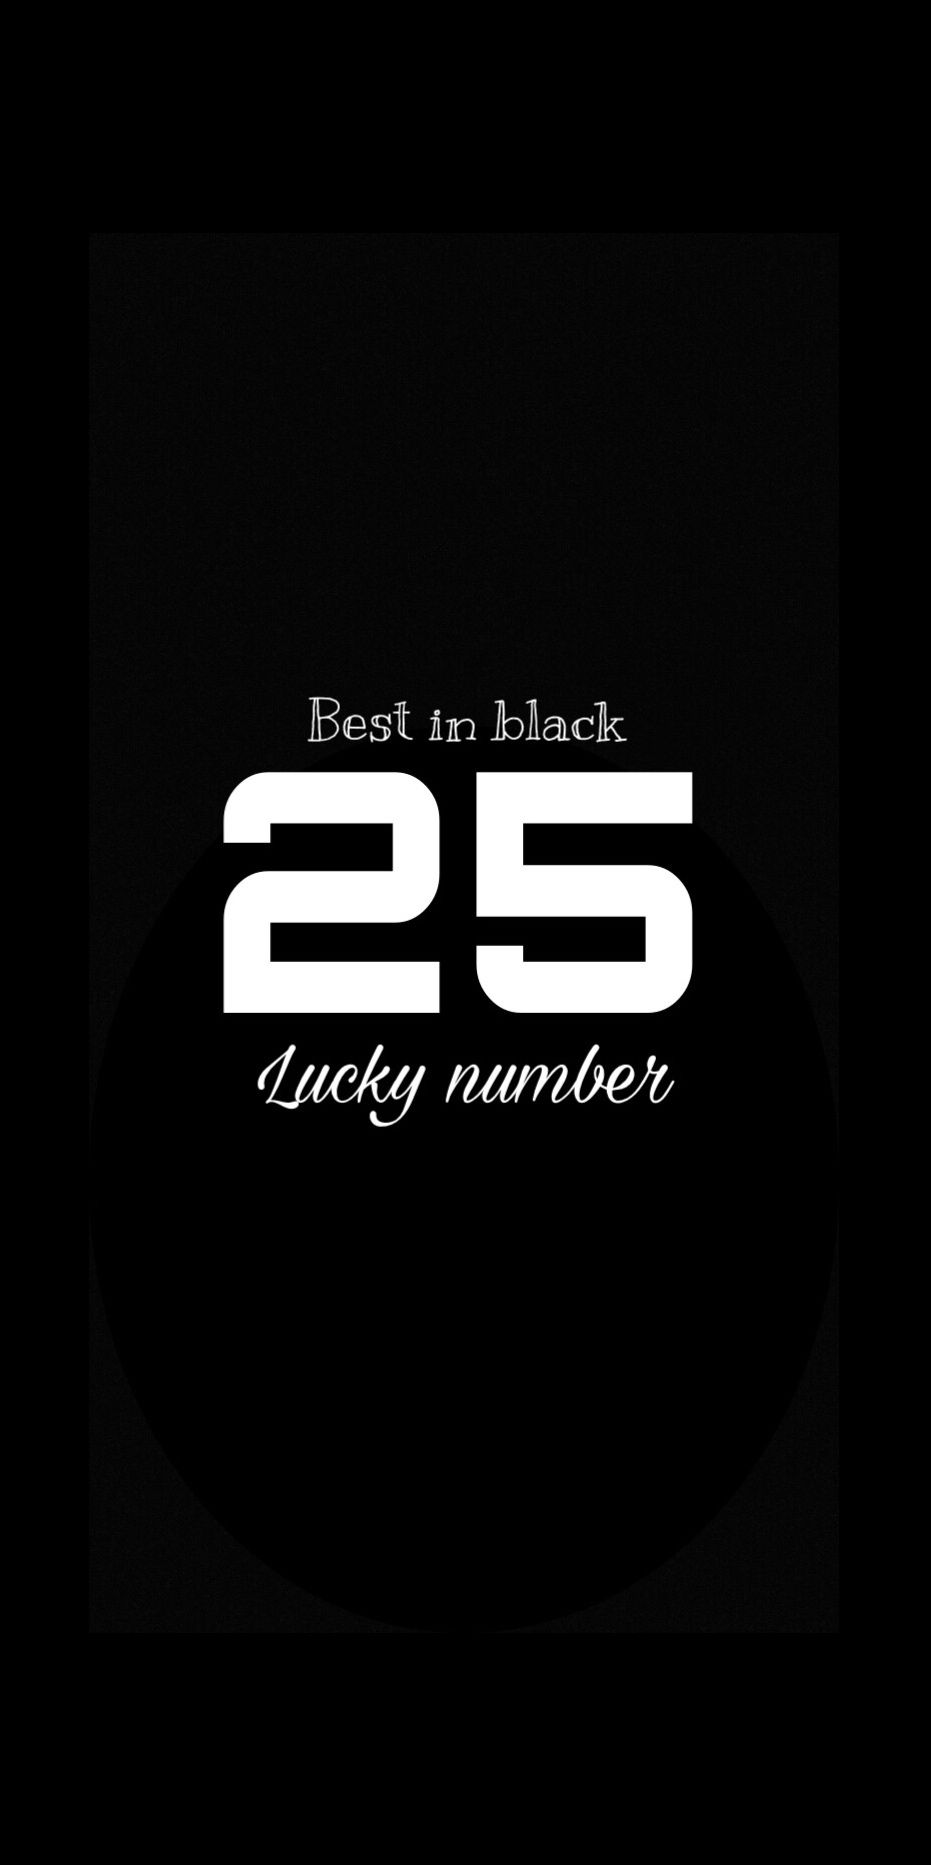 luck number, iPhone wallpaper 6. Number wallpaper, Lucky number, North face logo